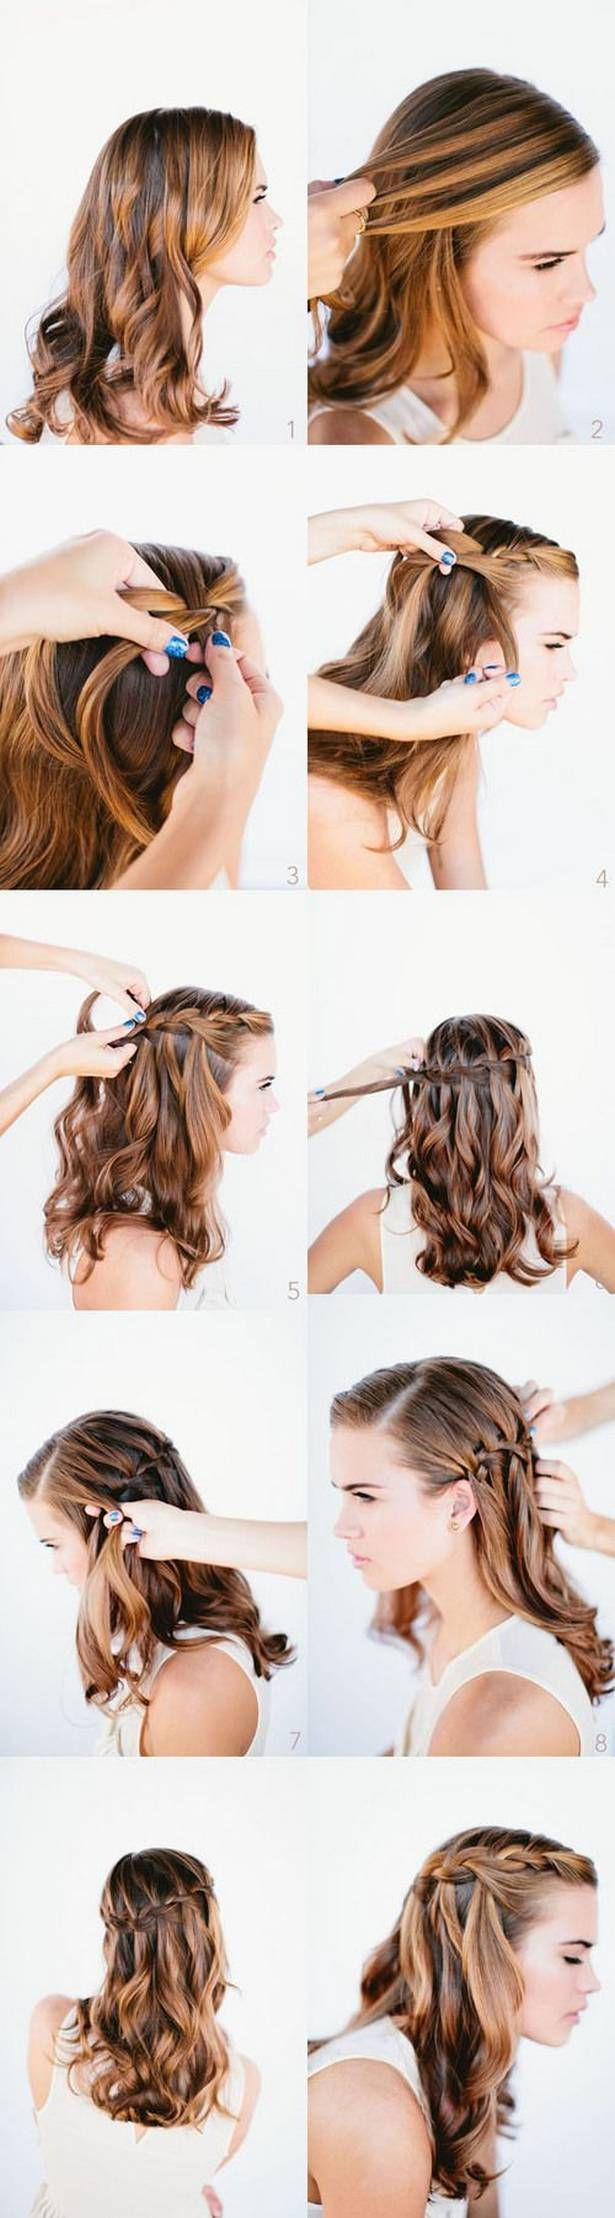 Easy Hairstyles At Home
 Easy hairstyles for long hair to do at home step by step